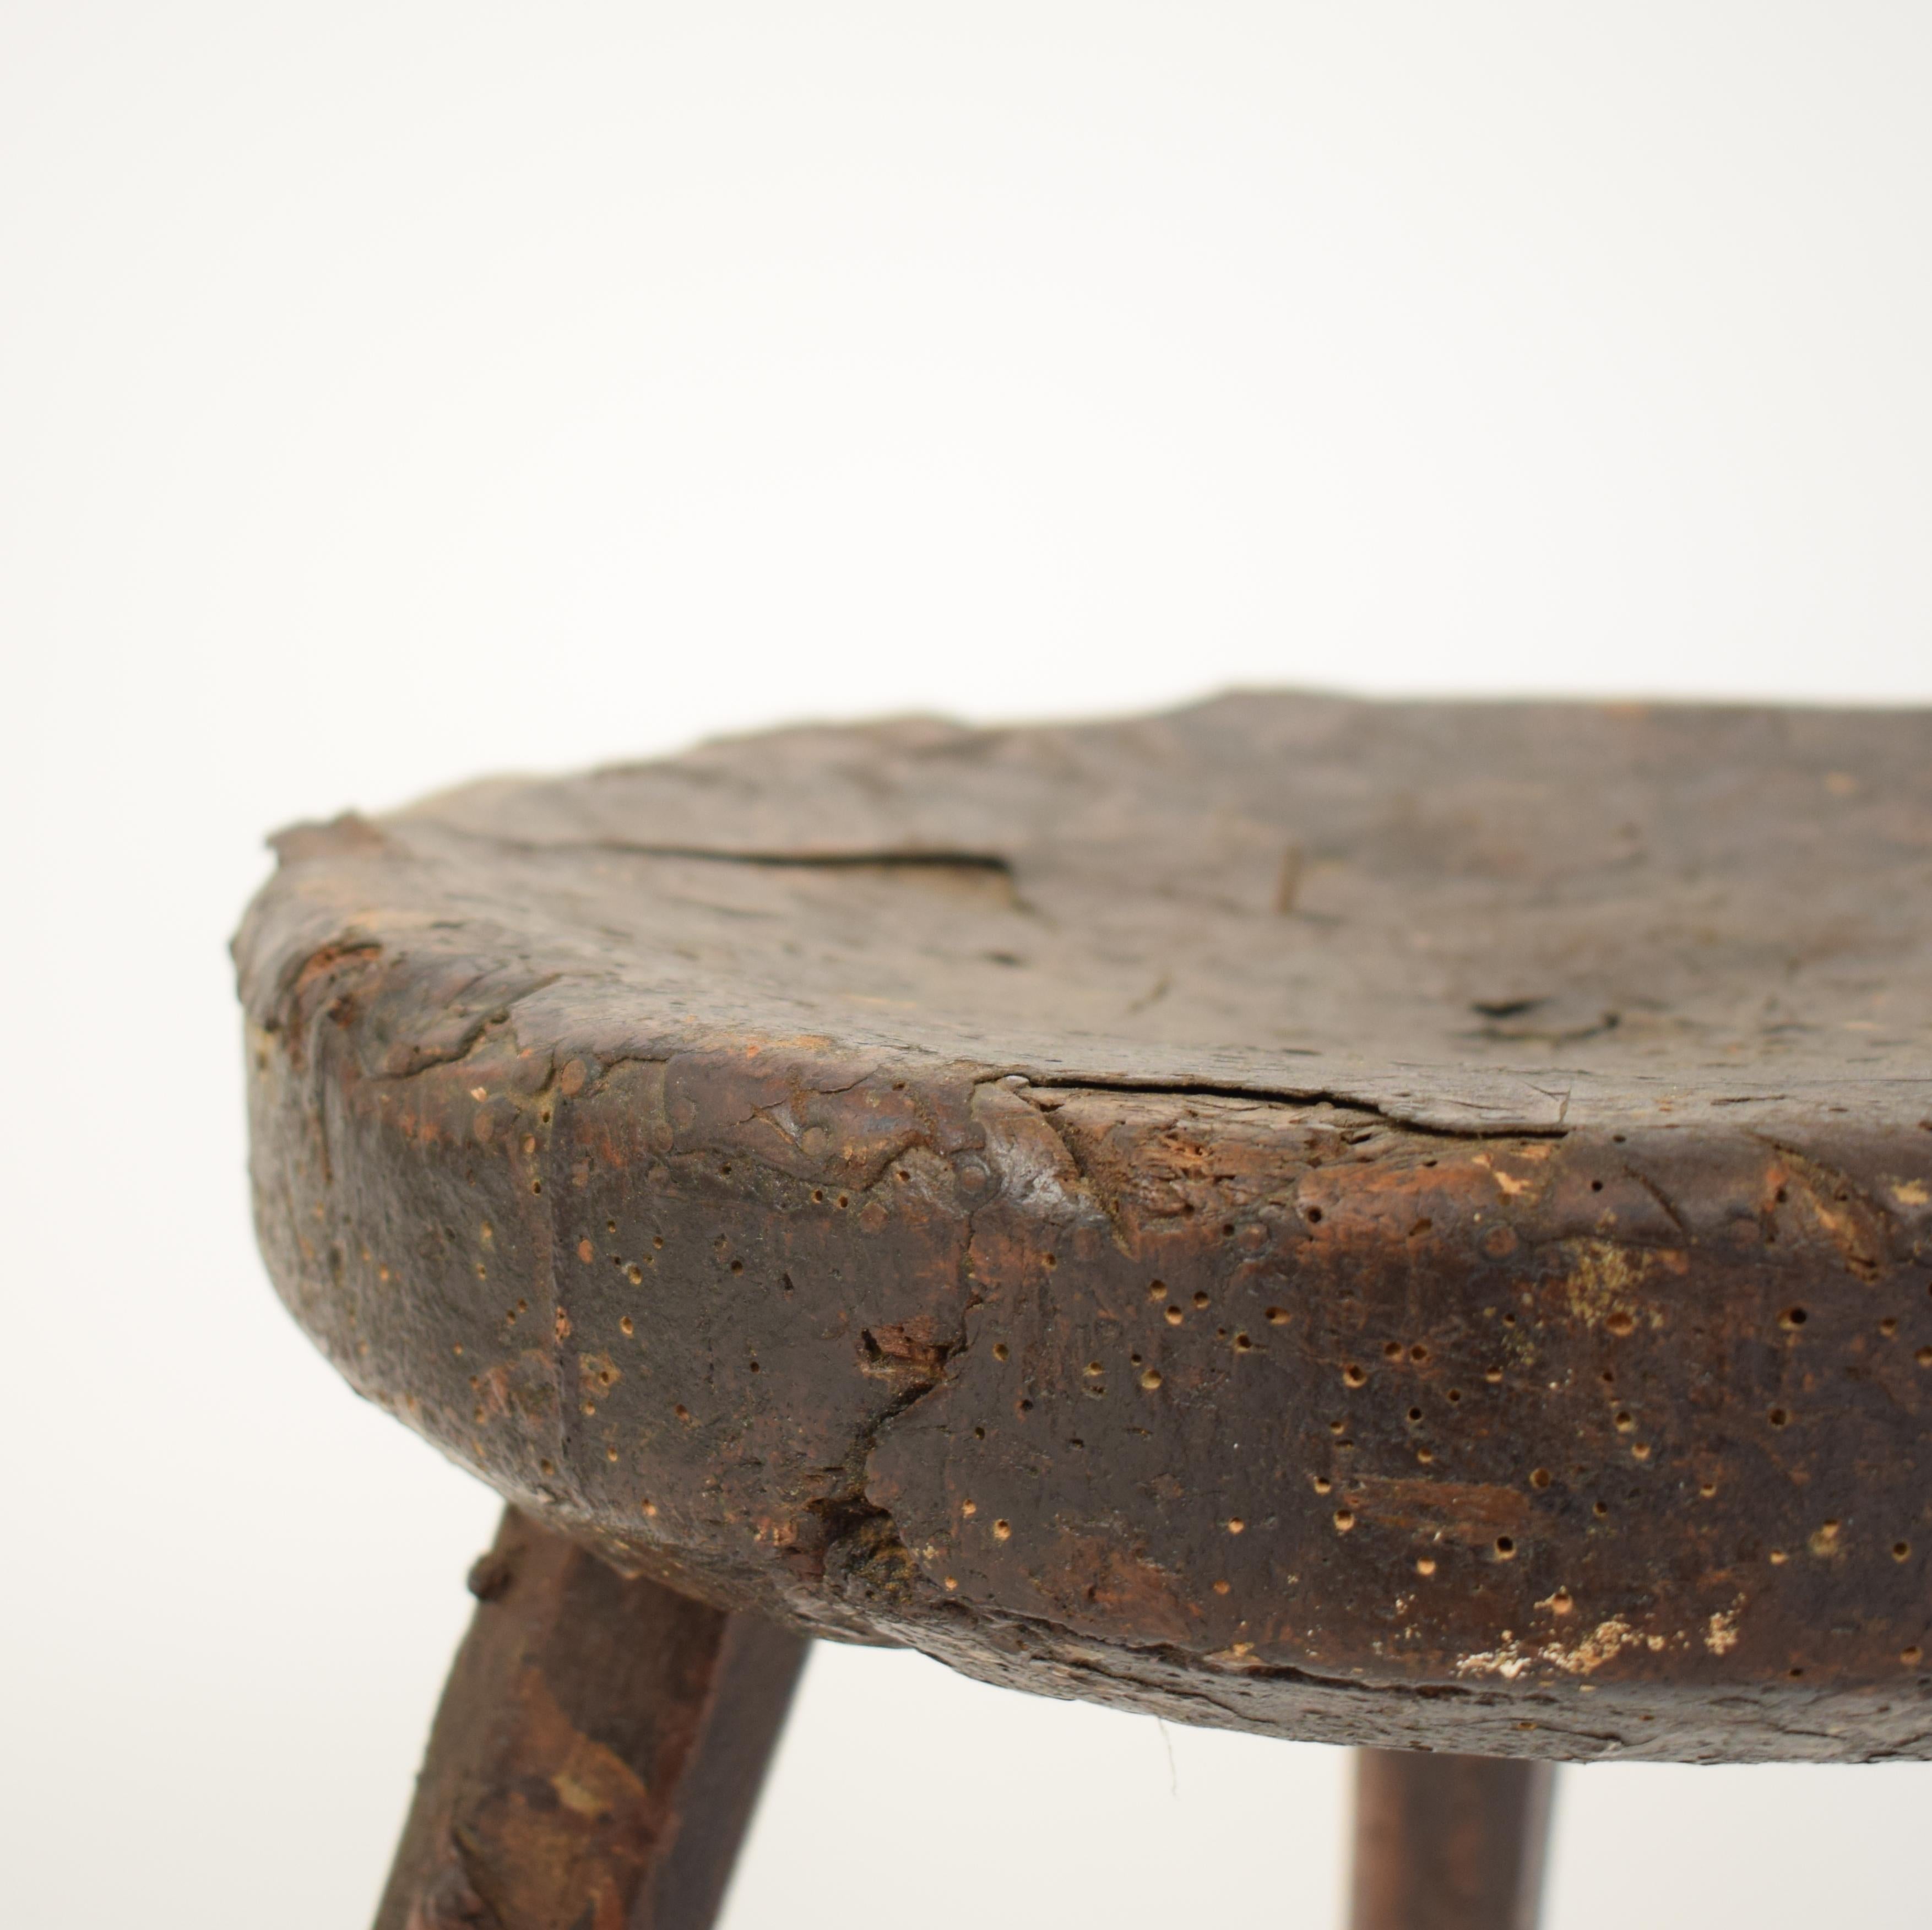 This primitive French elm country splayed leg wood stool was made in the late 19th century, circa 1880.
It has a leather cover over the seating part.
It has this perfect Wabi Sabi look and is just beautiful in style and Patina.

A unique piece